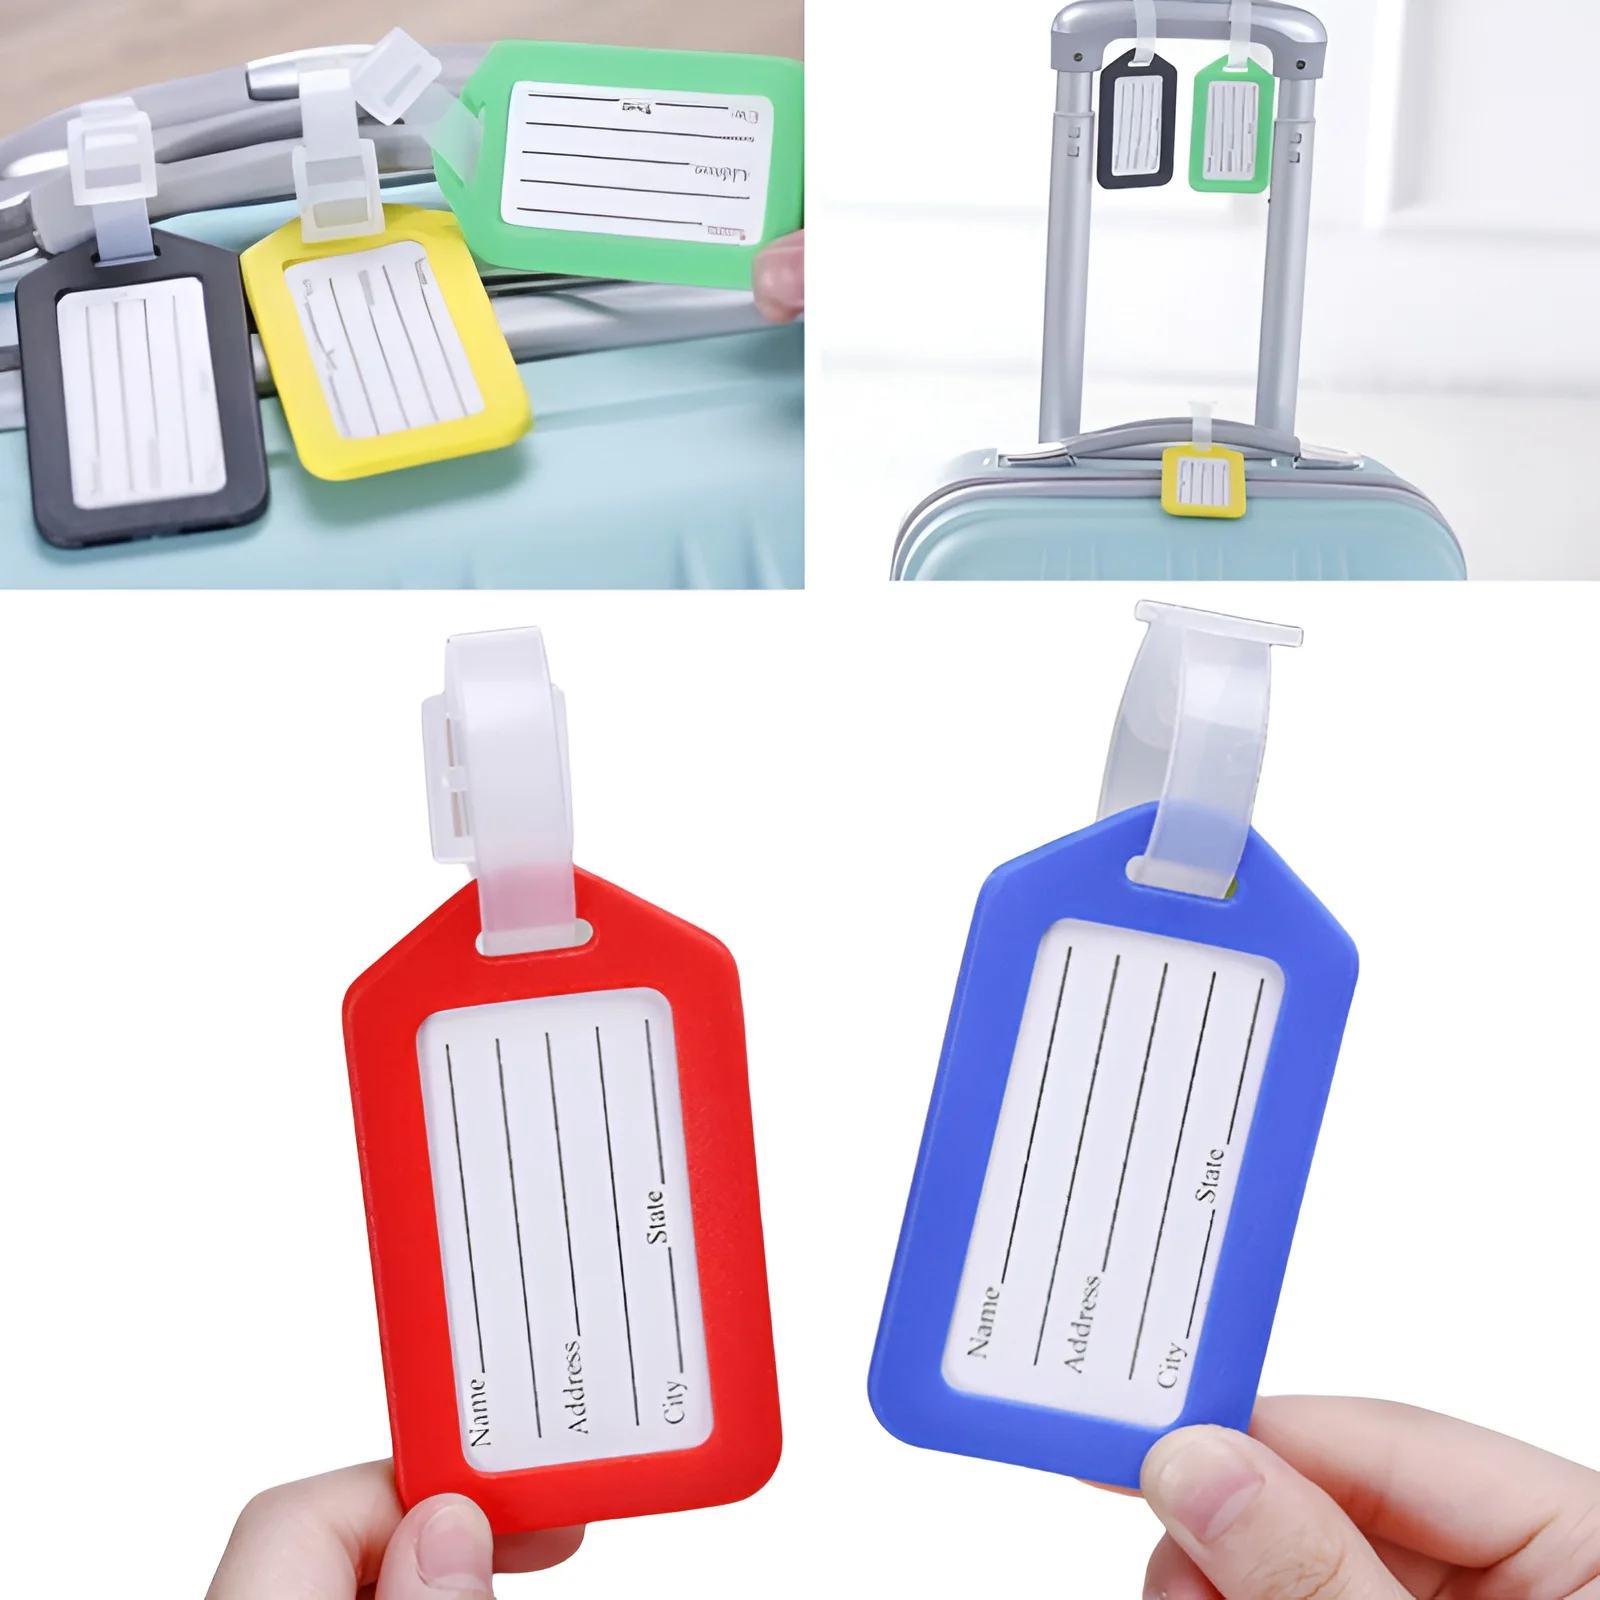 

20pcs Luggage Tags Suitcase Label Bag Travel Accessories Luggage Bag Tag Name Address ID Label Plastic Suitcase Baggage Tags